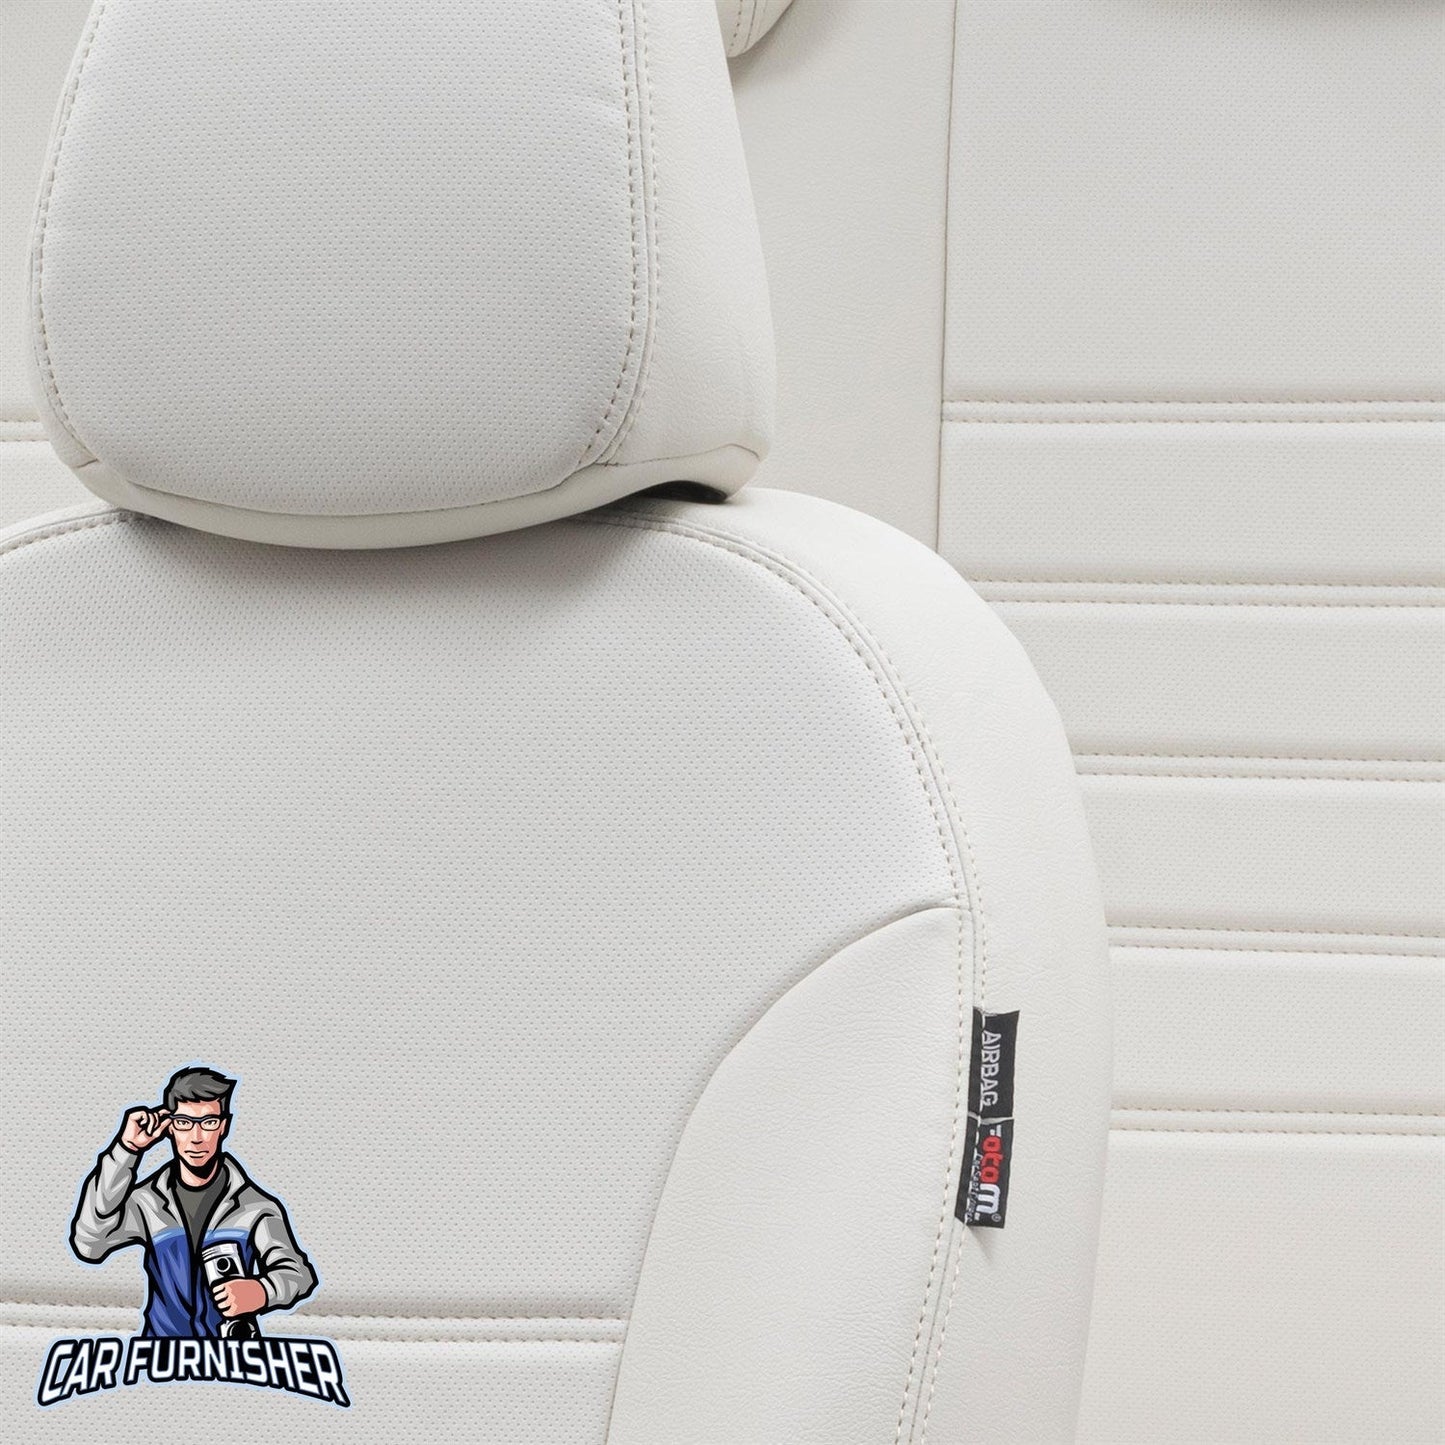 Peugeot 107 Seat Covers Istanbul Leather Design Ivory Leather